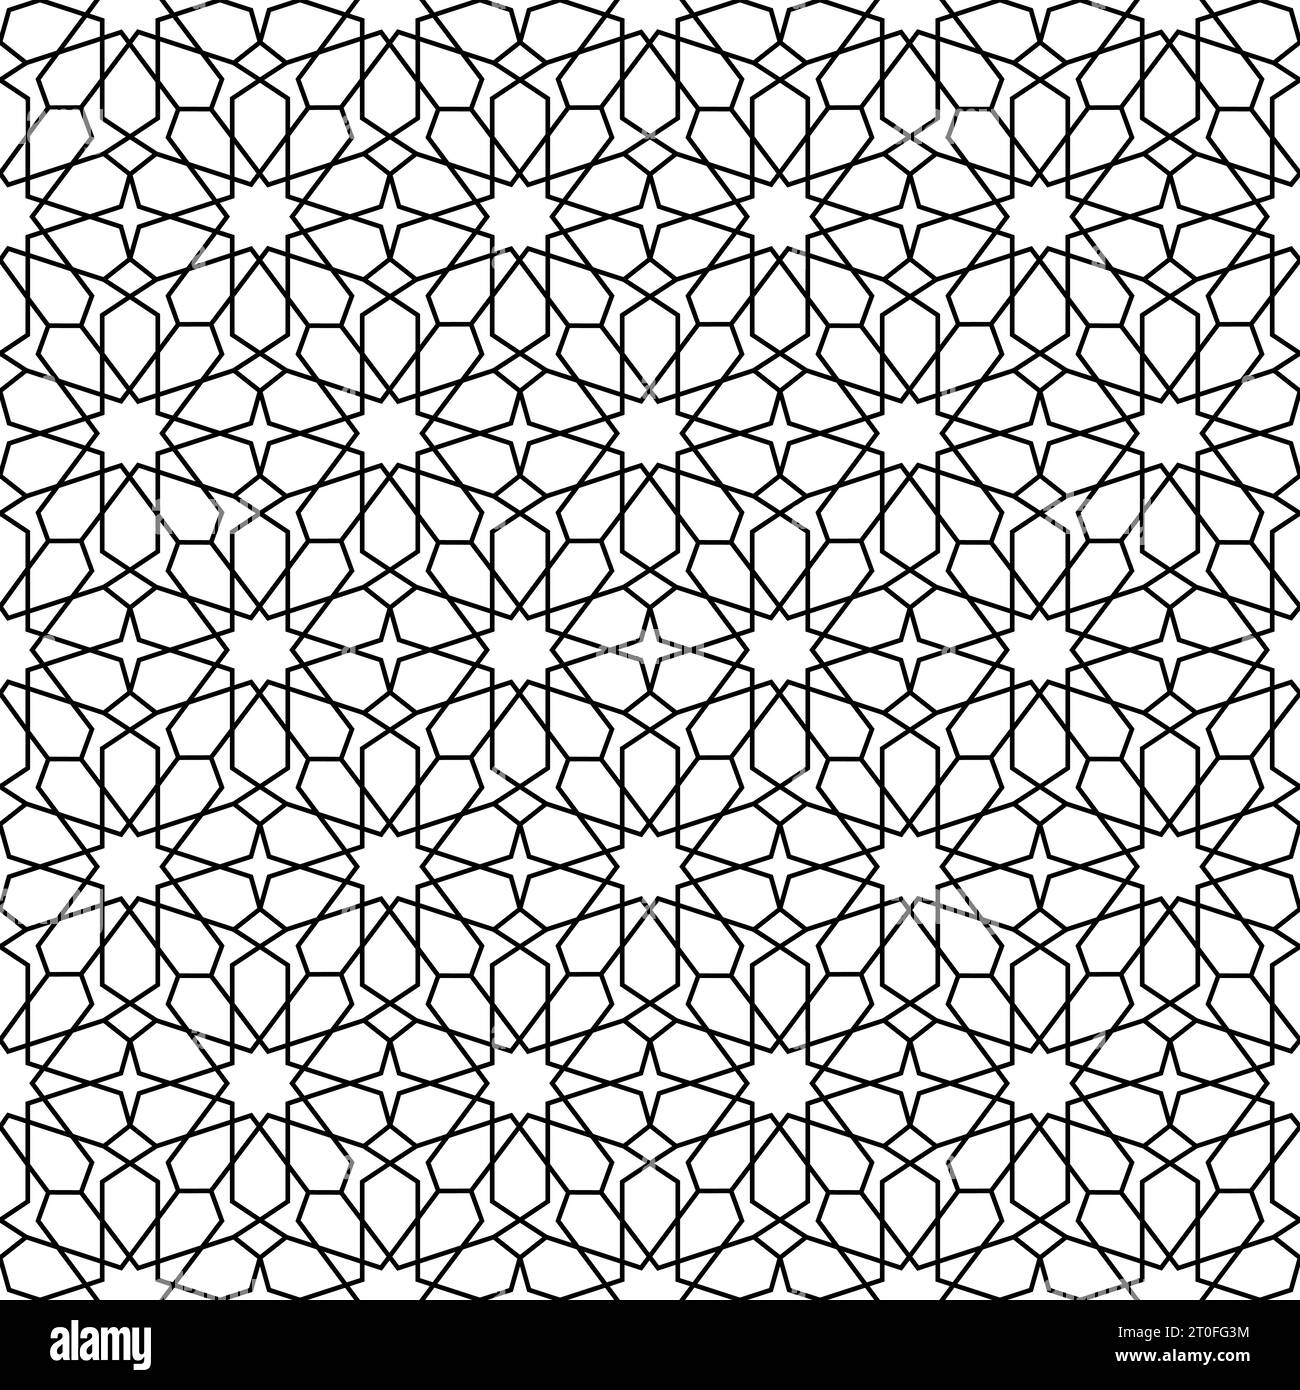 Morocco seamless pattern. Repeating black marocco grid isolated on white background. Repeated simple moroccan mosaic motive. Islamic textur for design Stock Vector